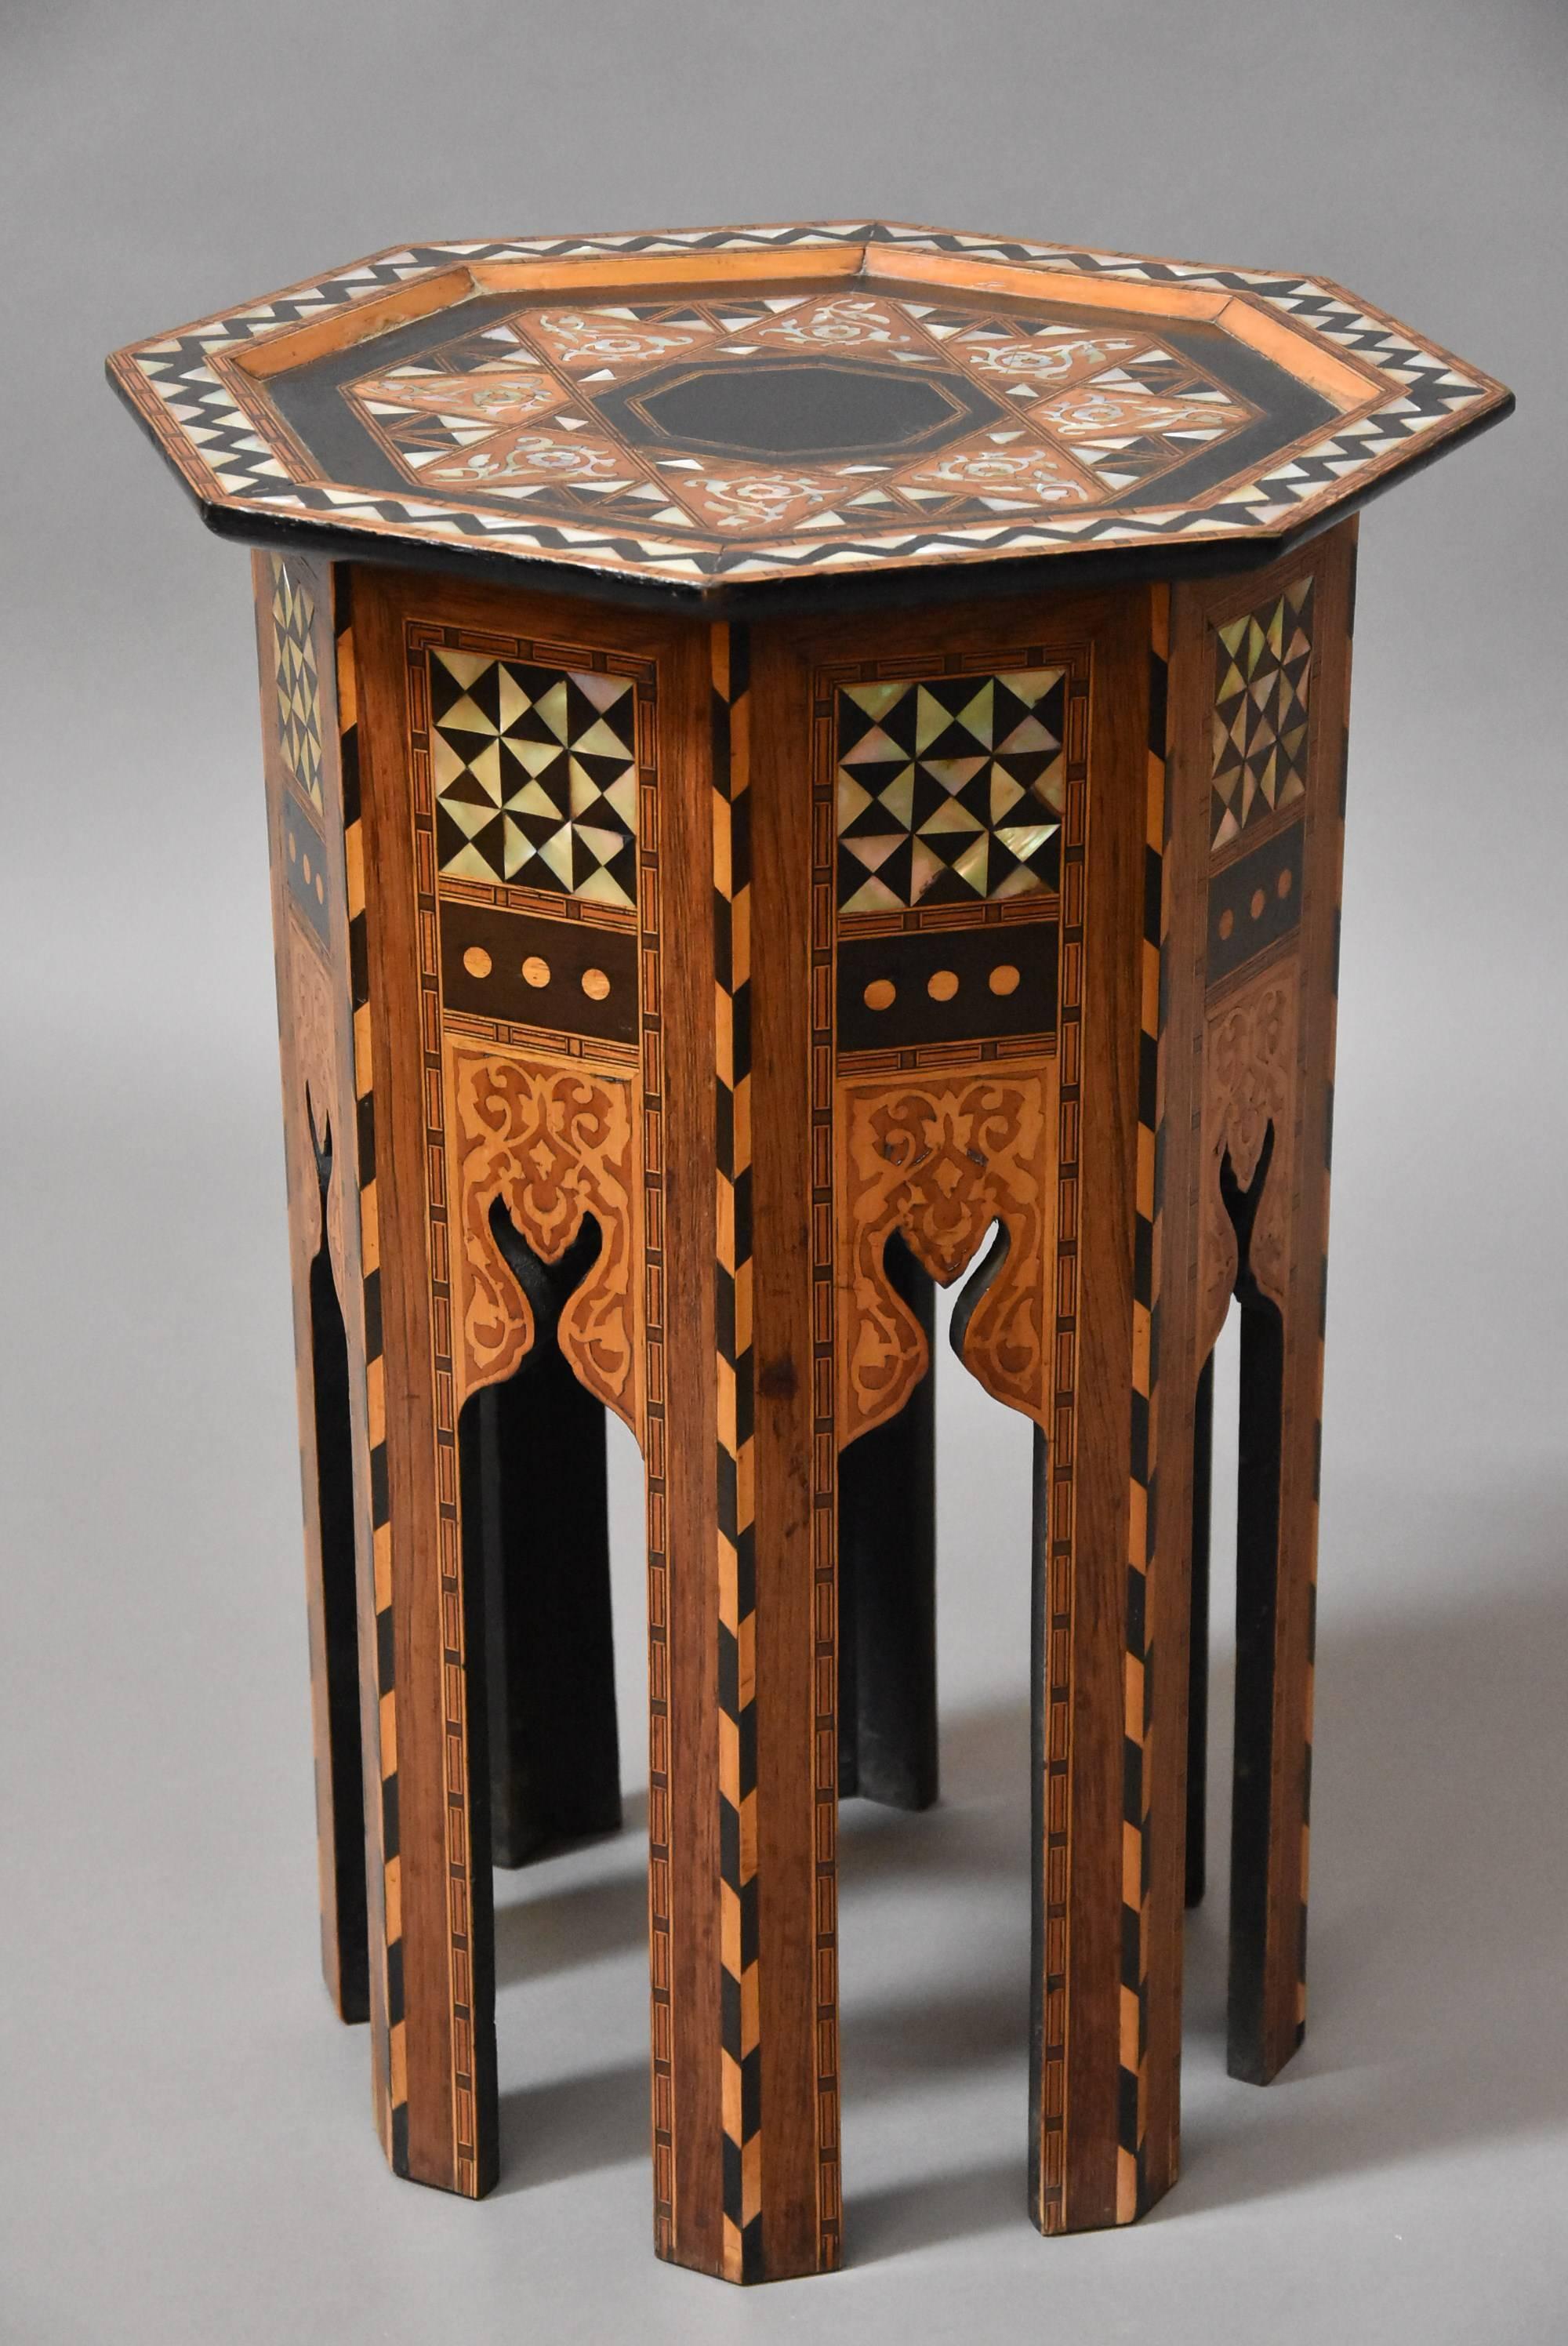 A late 19th century Liberty & Co. inlaid table or coffee stool of octagonal shape in excellent original condition. 

The top consists of inlaid decoration of mother of pearl and various exotic woods to create a decorative geometric design.